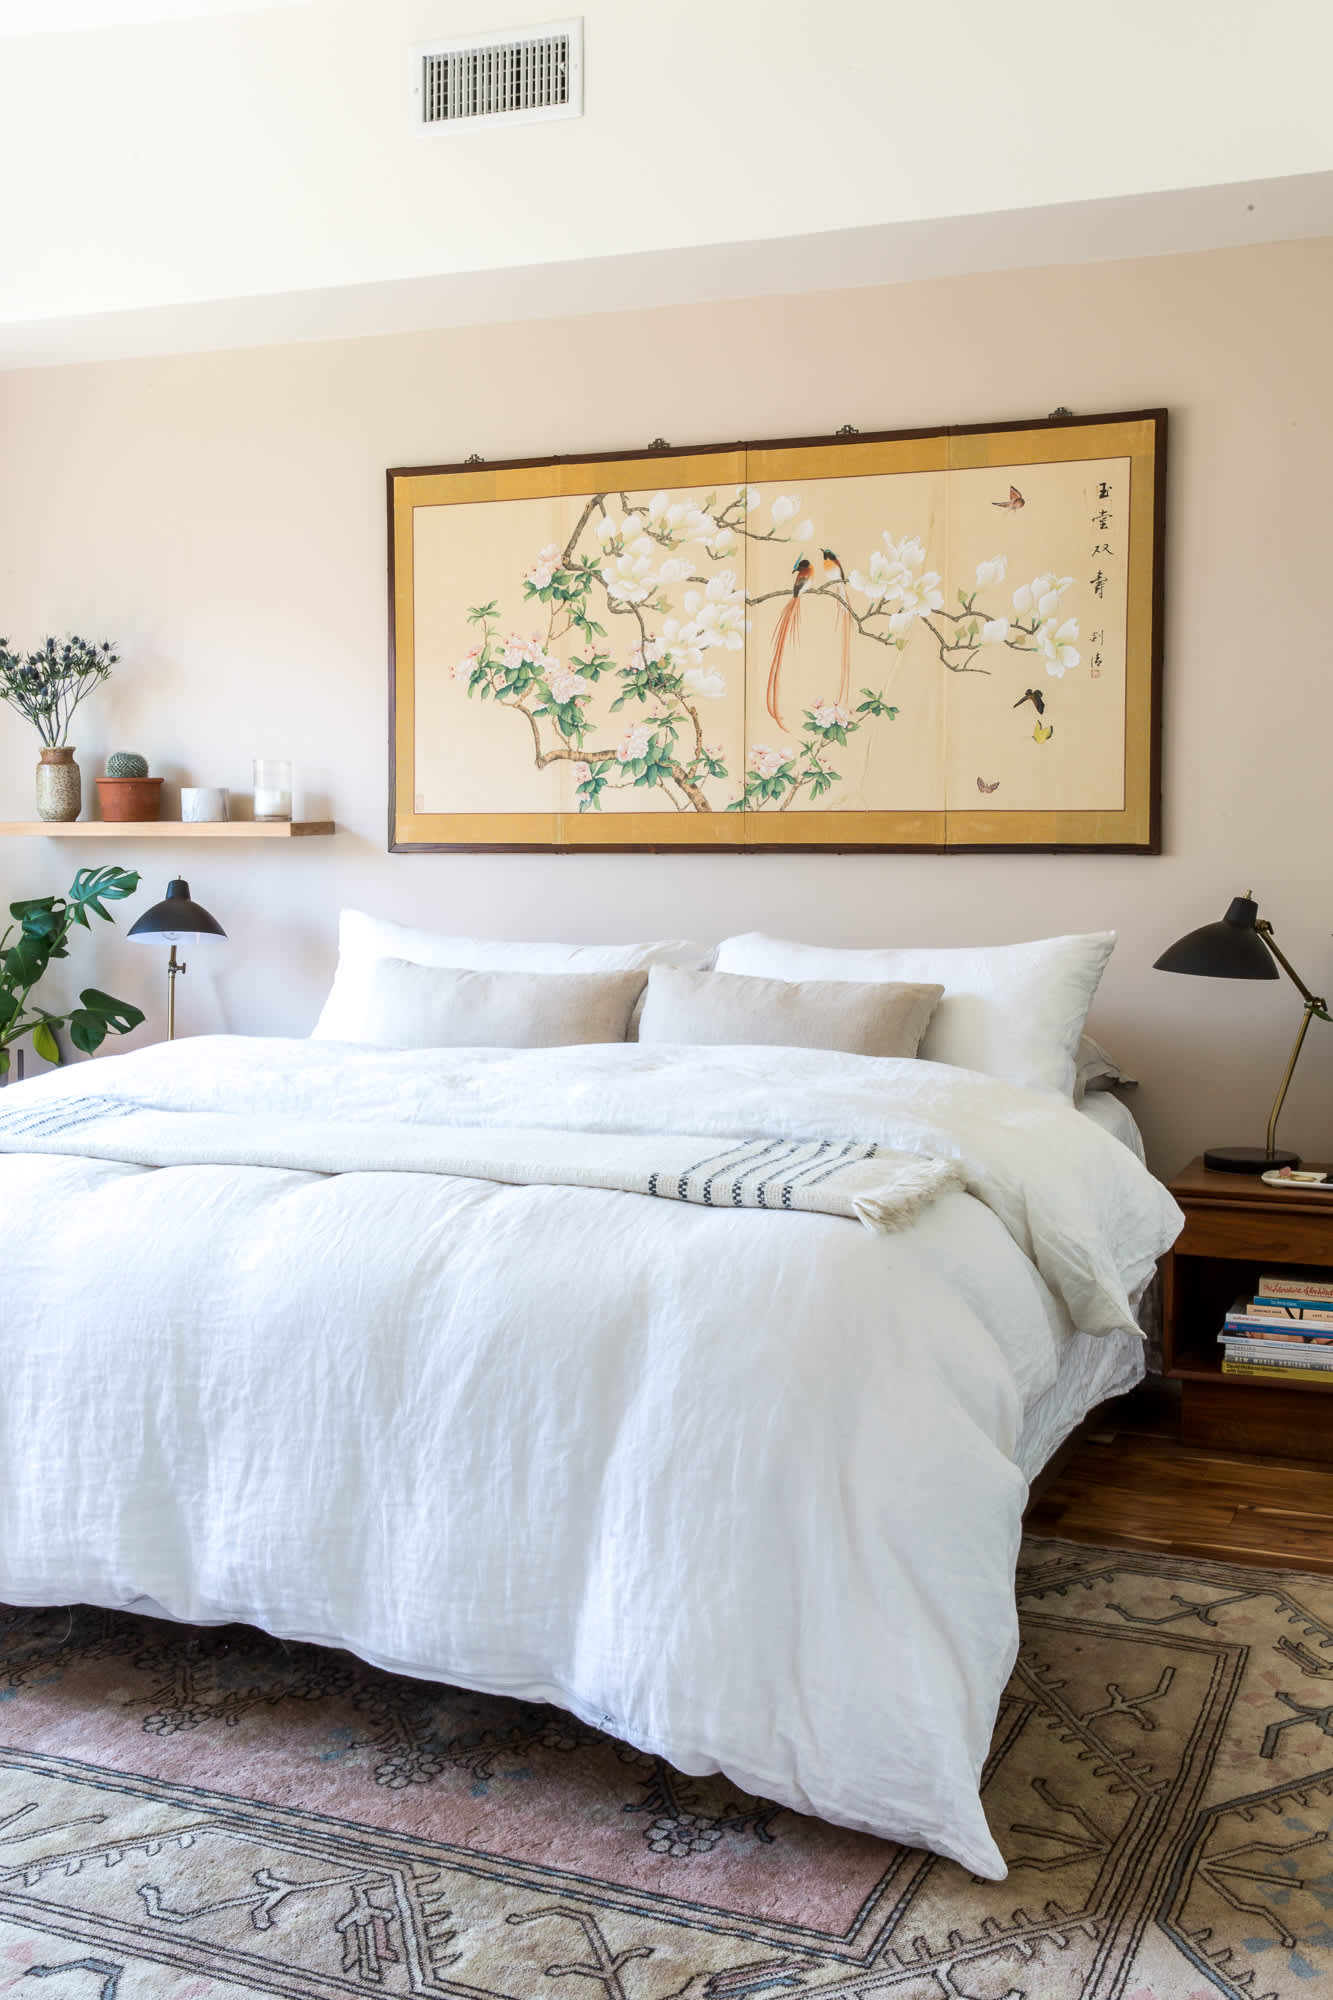 10 Alternative Headboard Ideas You Might Not Have Thought Of